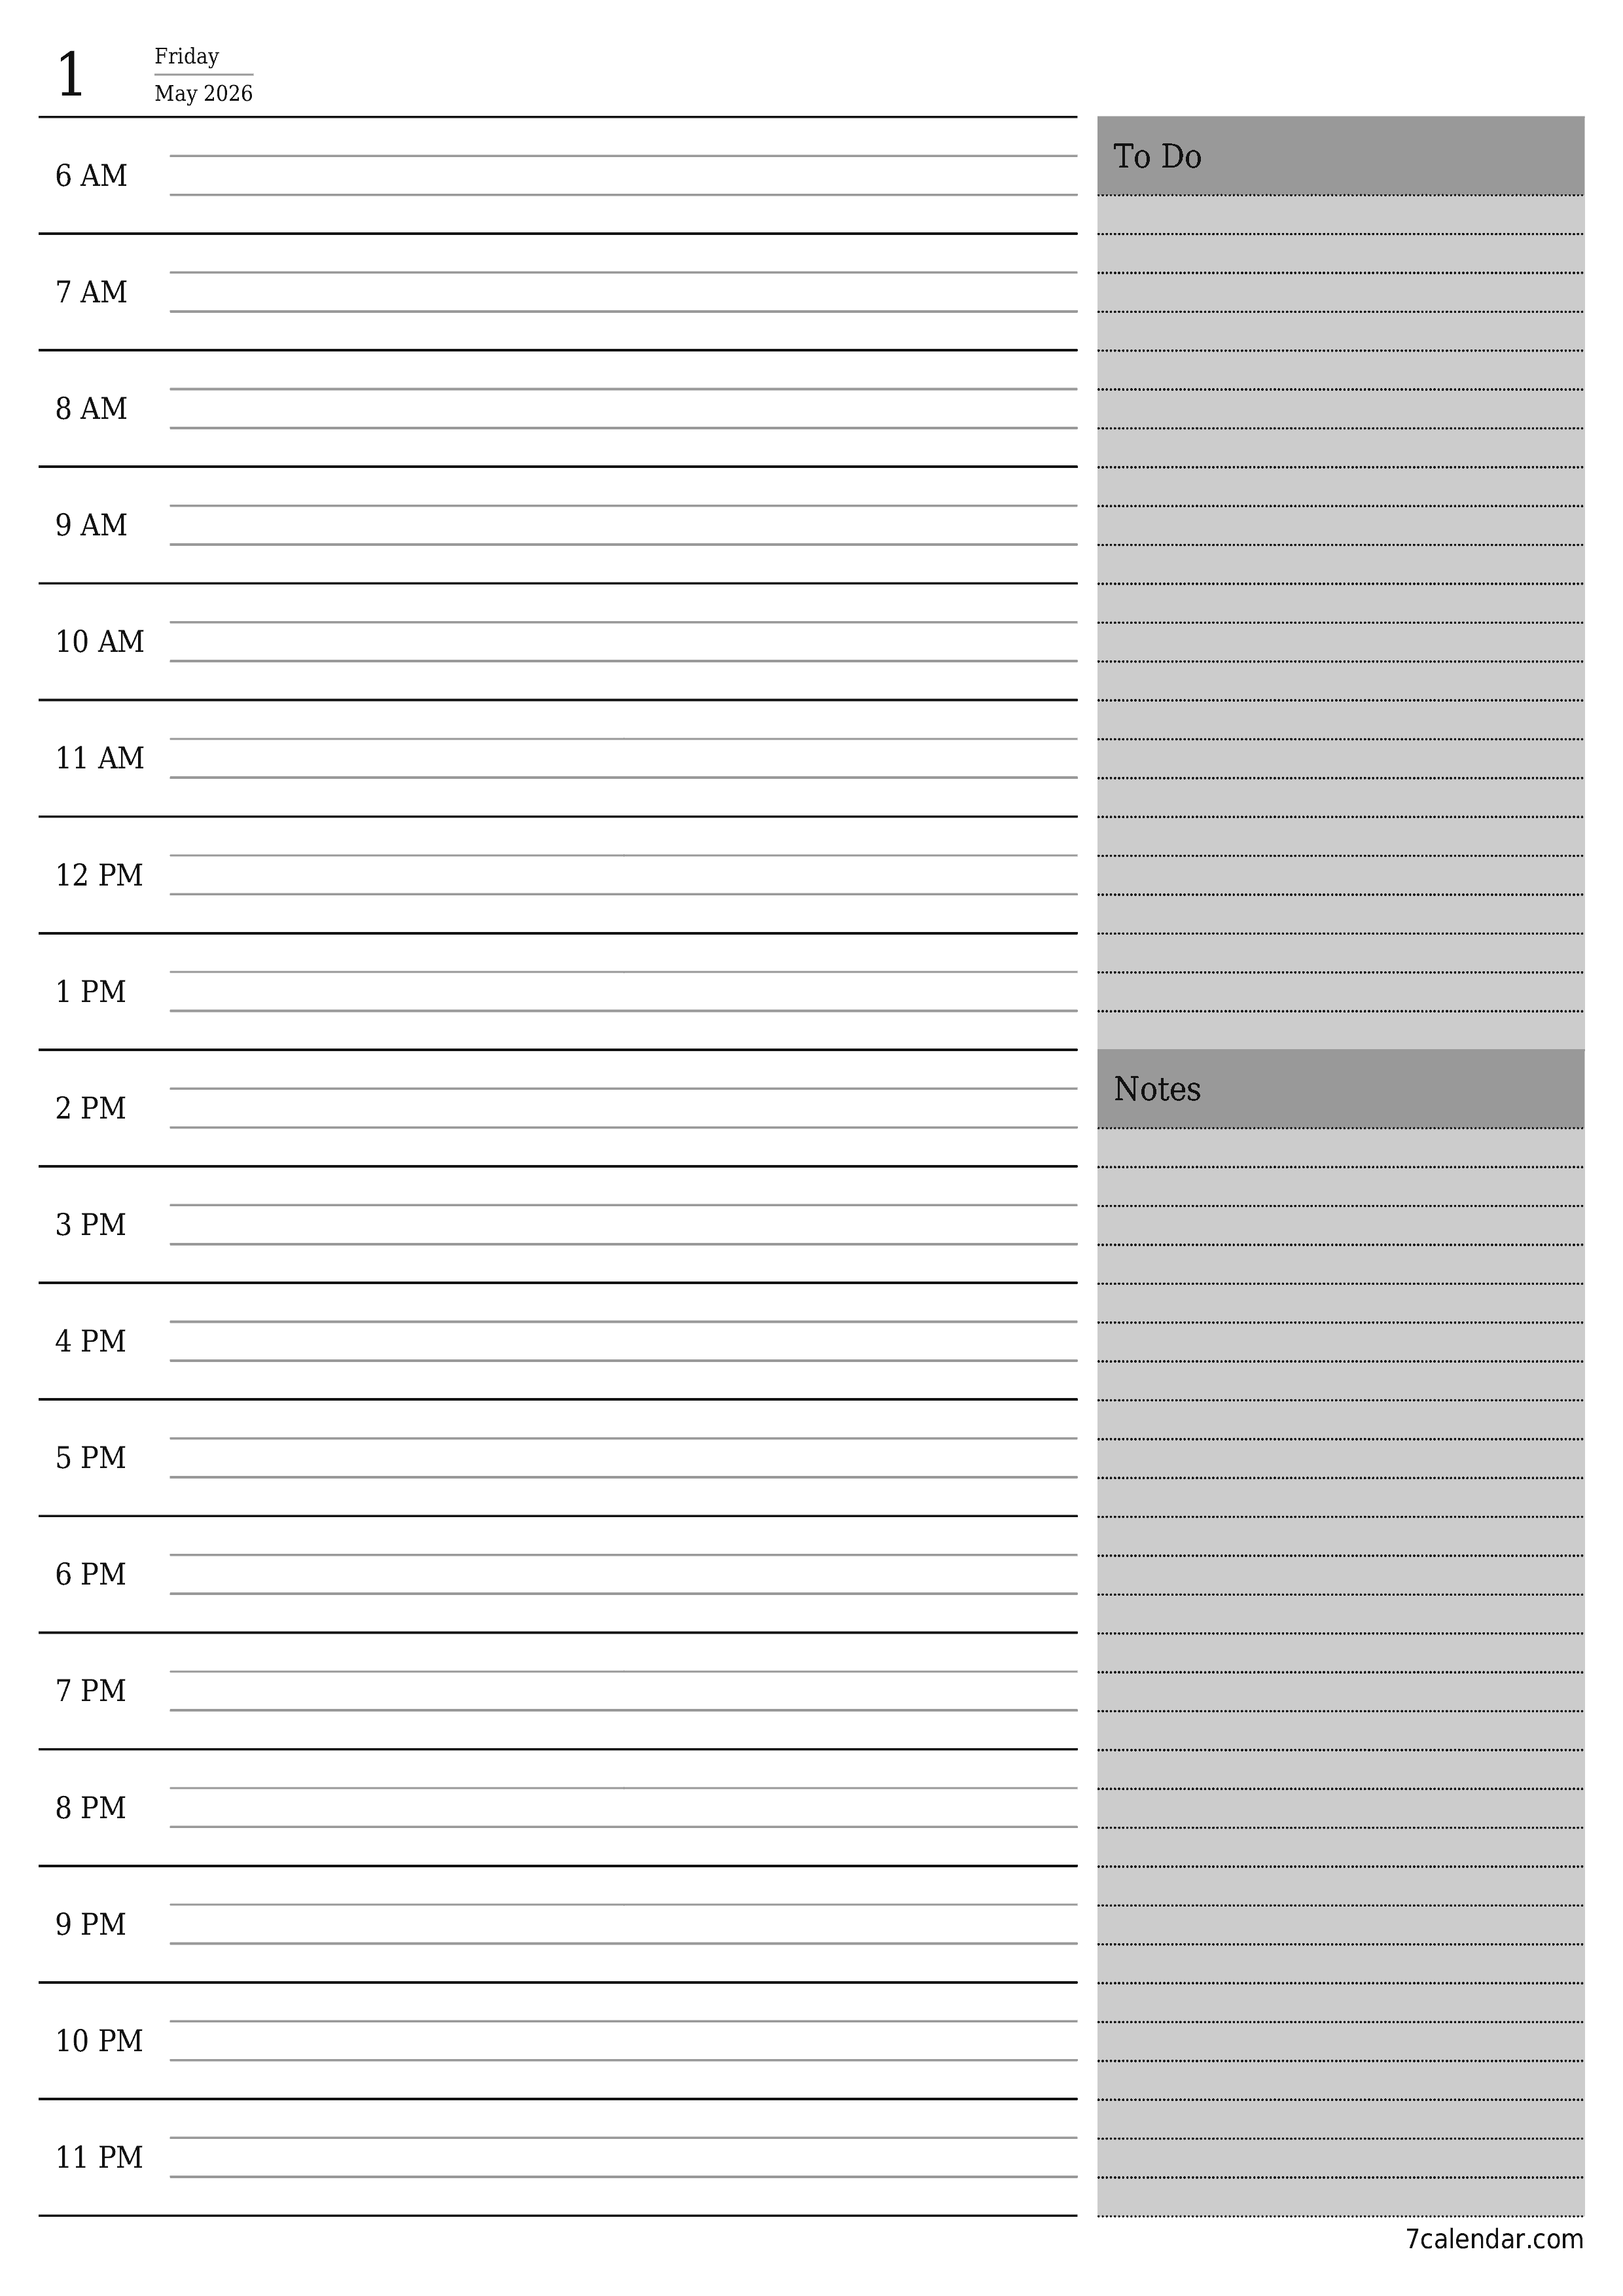 Blank daily printable calendar and planner for day May 2026 with notes, save and print to PDF PNG English